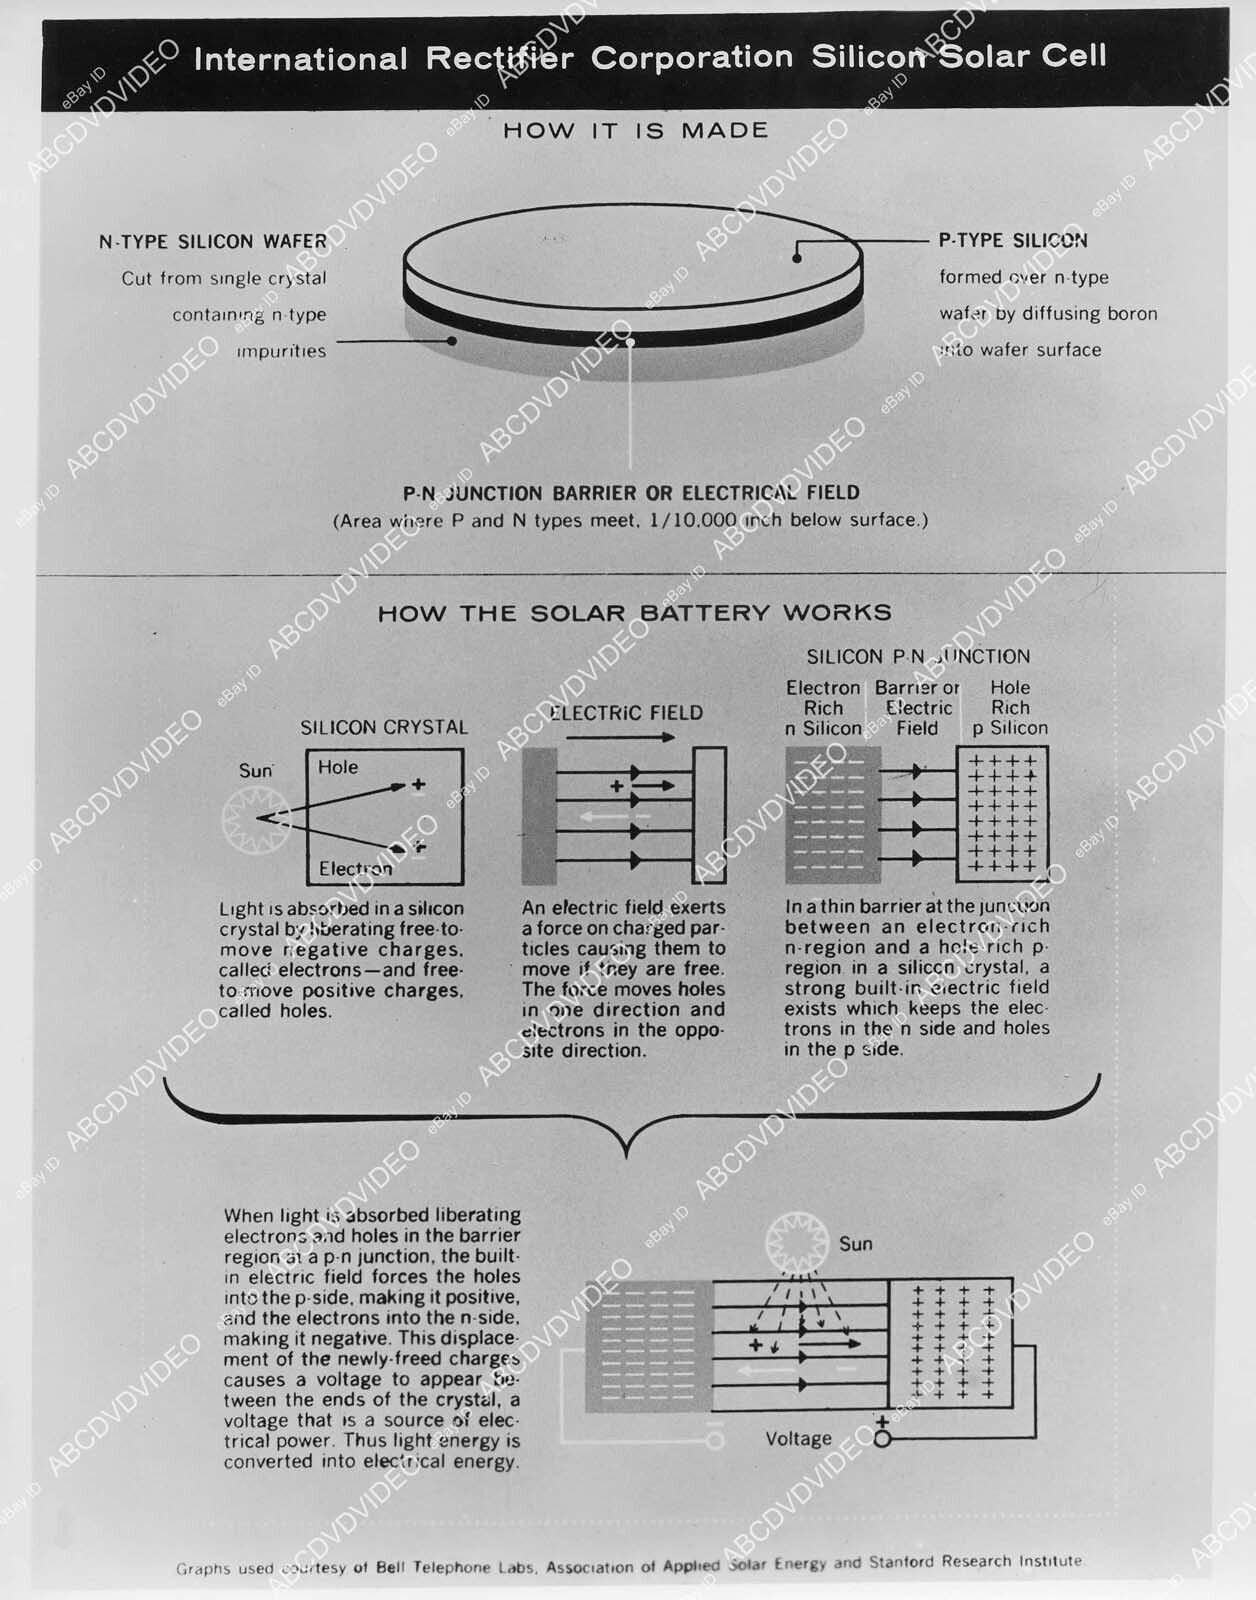 crp-1180 1950's International Rectifier Corp Silicon Solar Cell and how it works